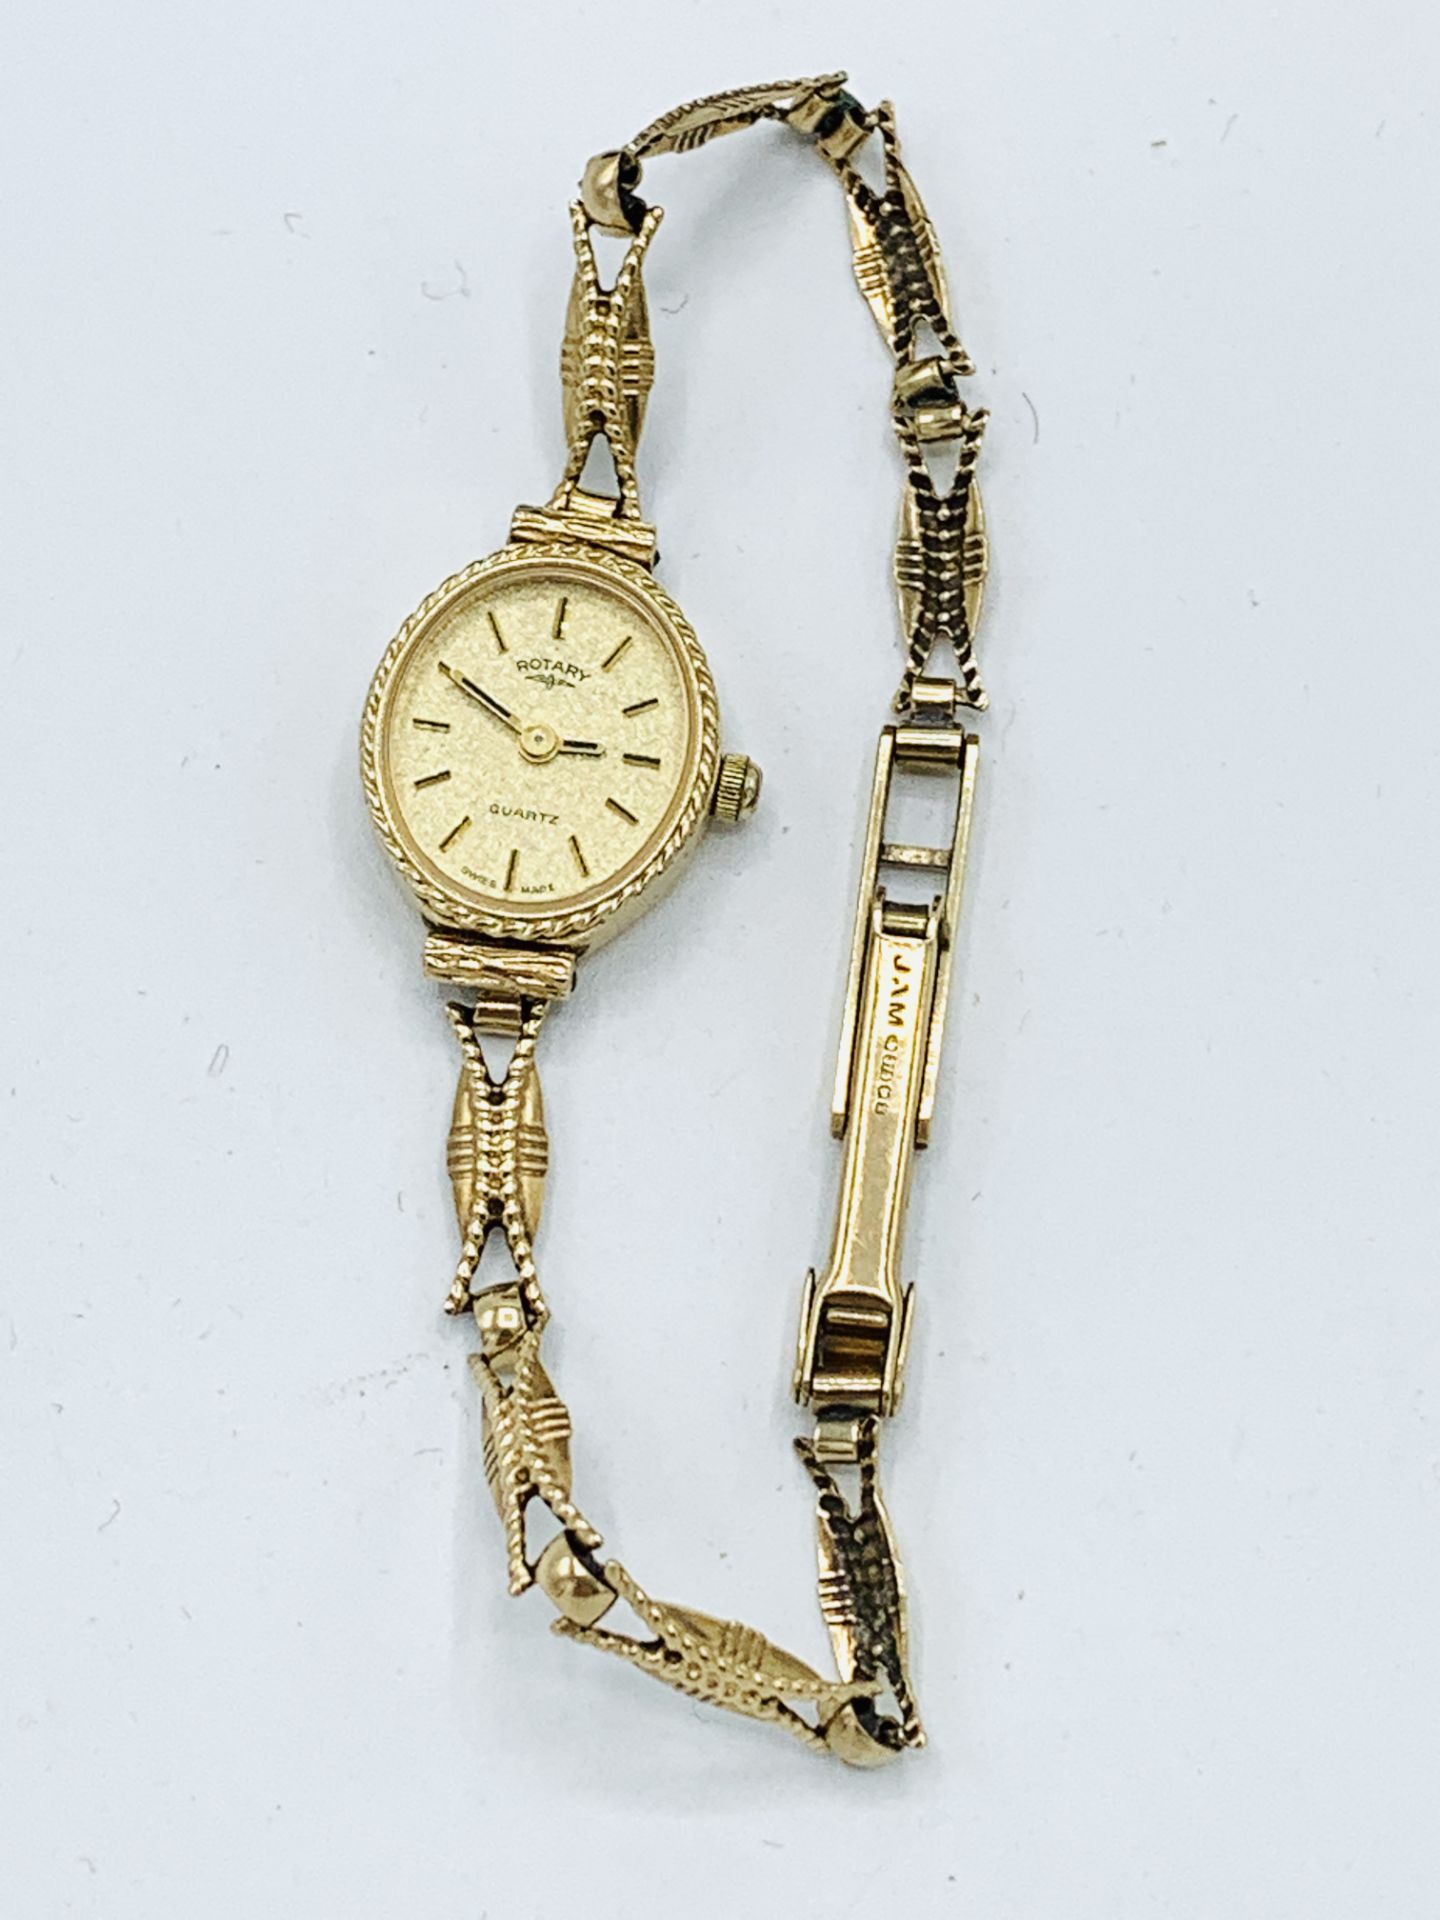 Rotary lady's quartz watch with 9ct gold case and strap - Image 3 of 3